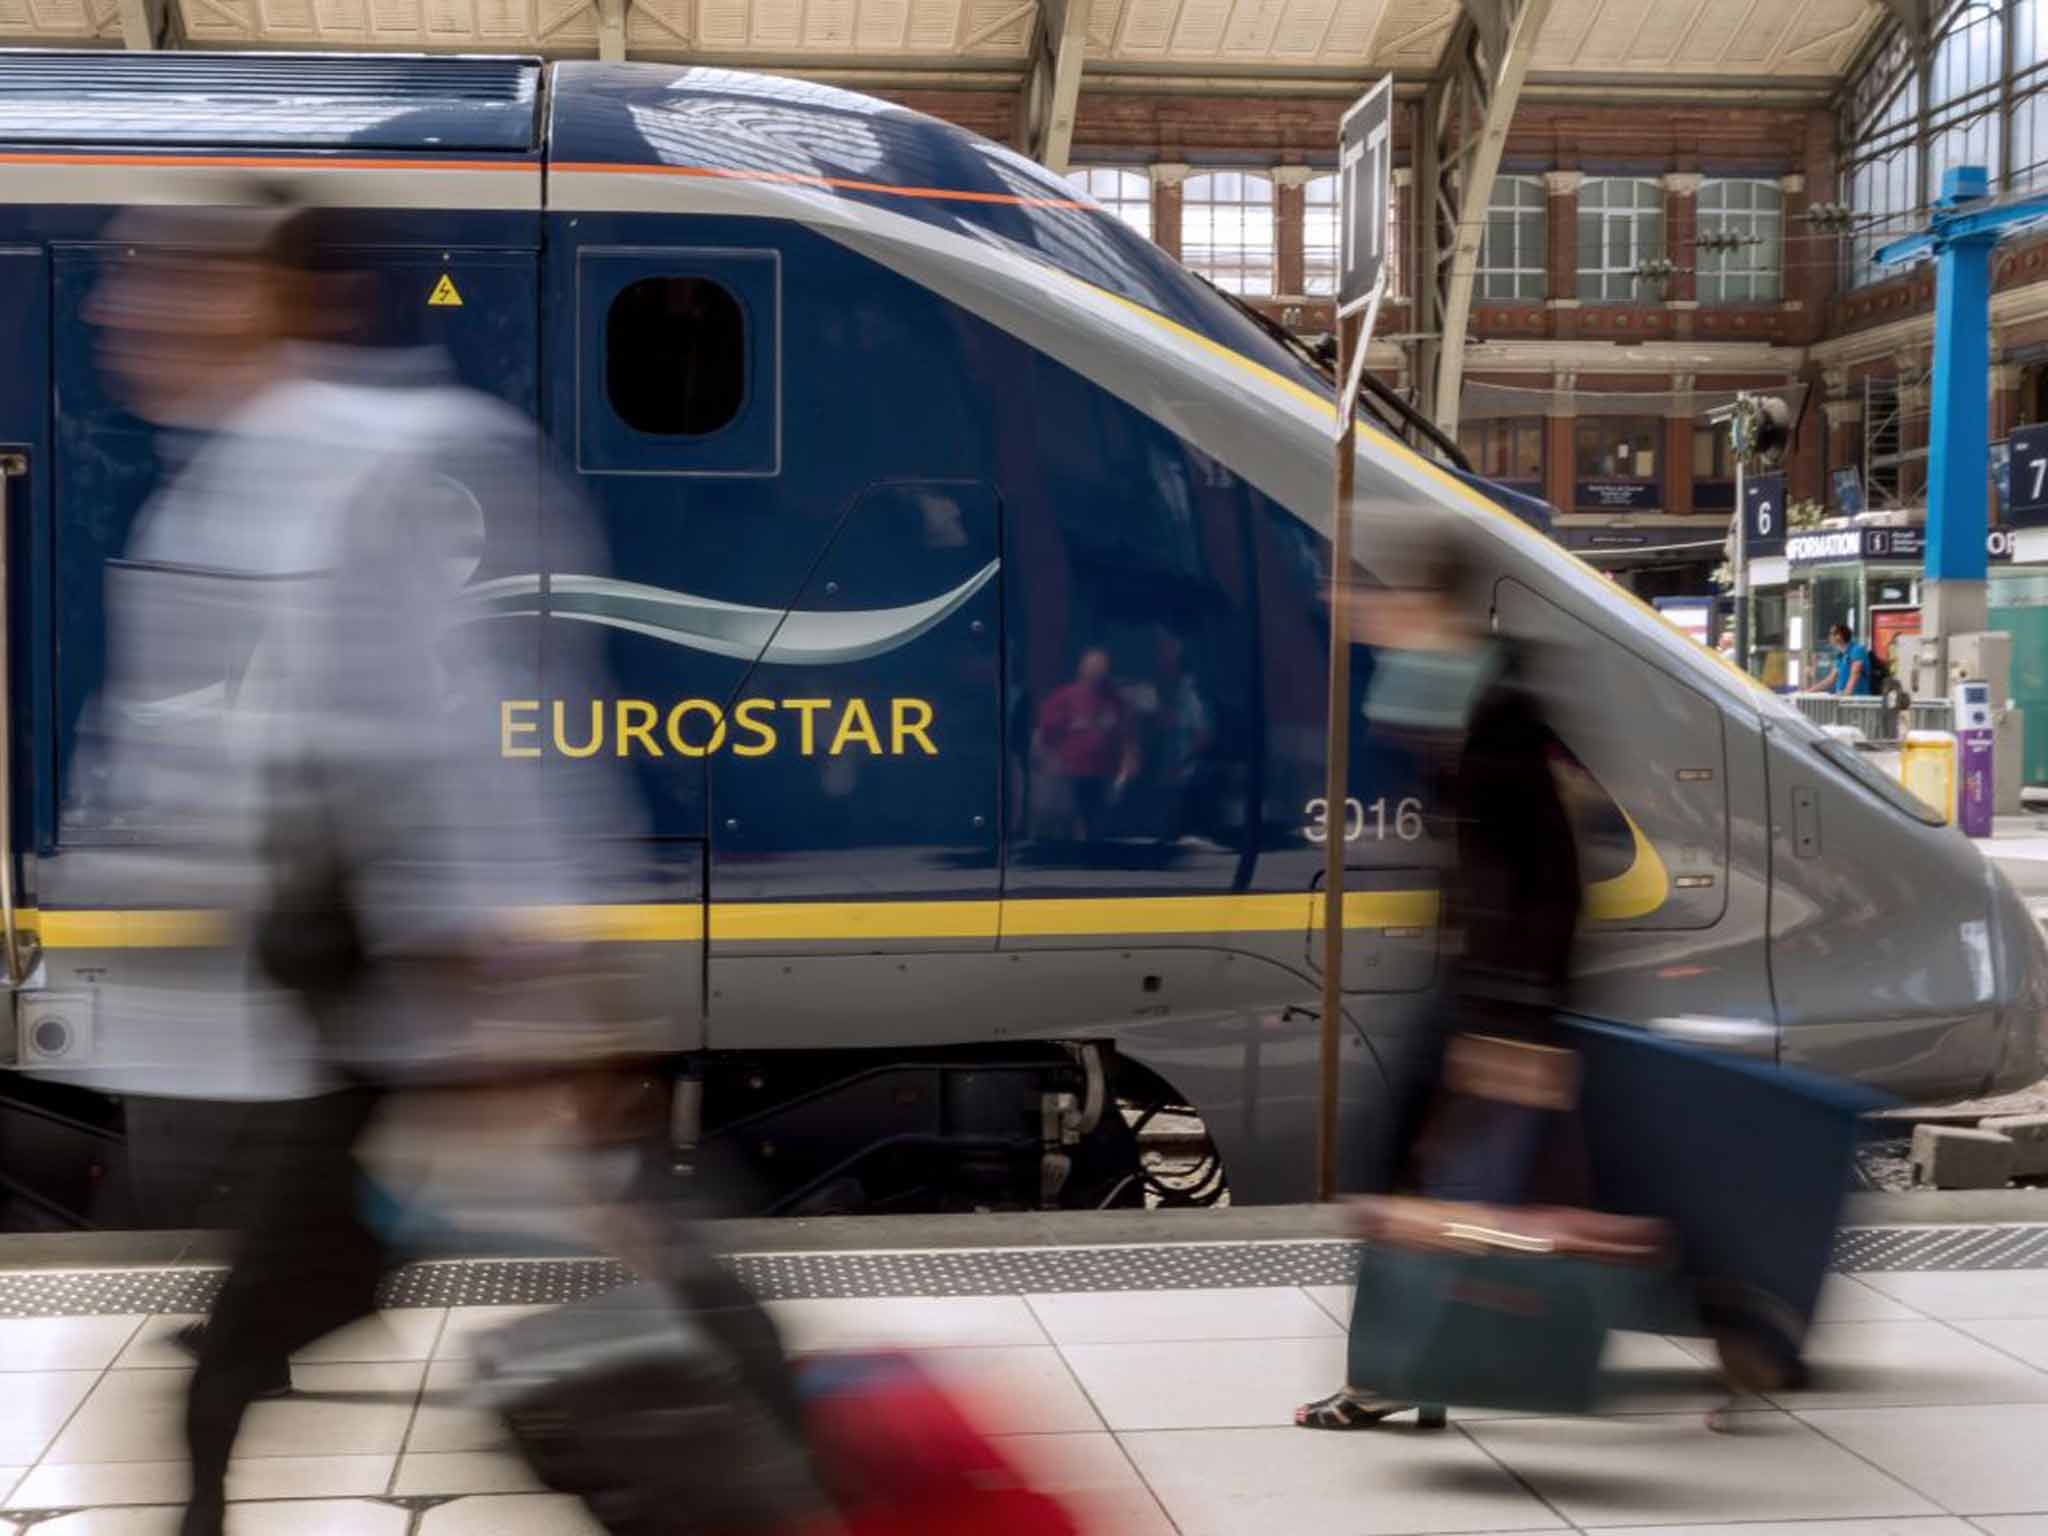 Eurostar predicts Friday 10 June will be one of the busiest 10 days in its history on the London-Paris run